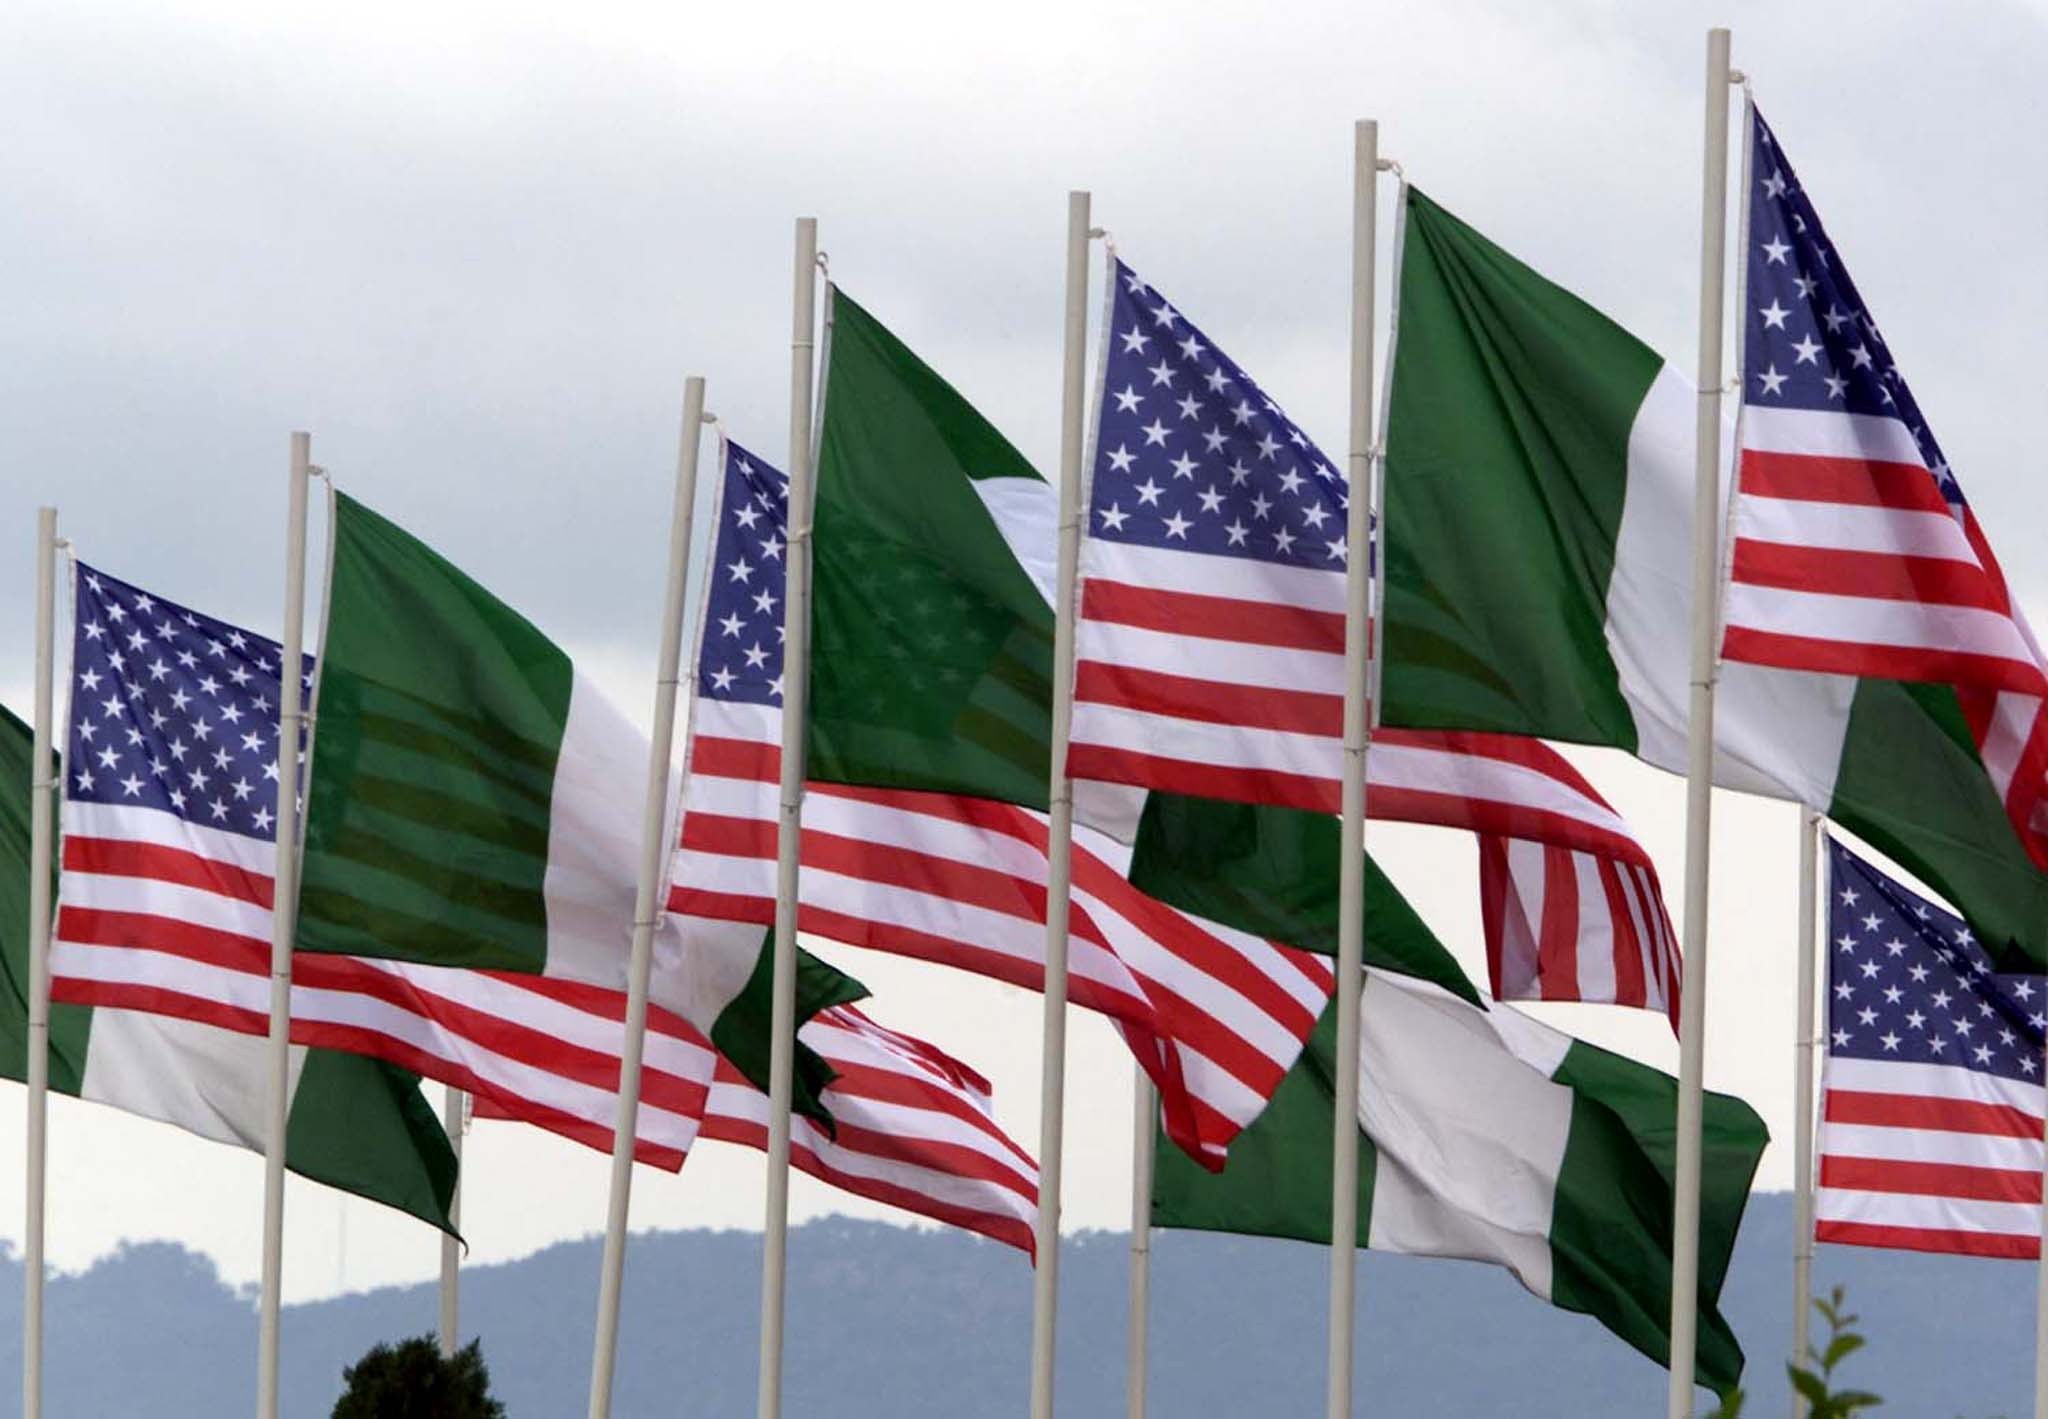 AMERICAN AND NIGERIAN FLAGS FLY NEXT TO EACH OTHER.